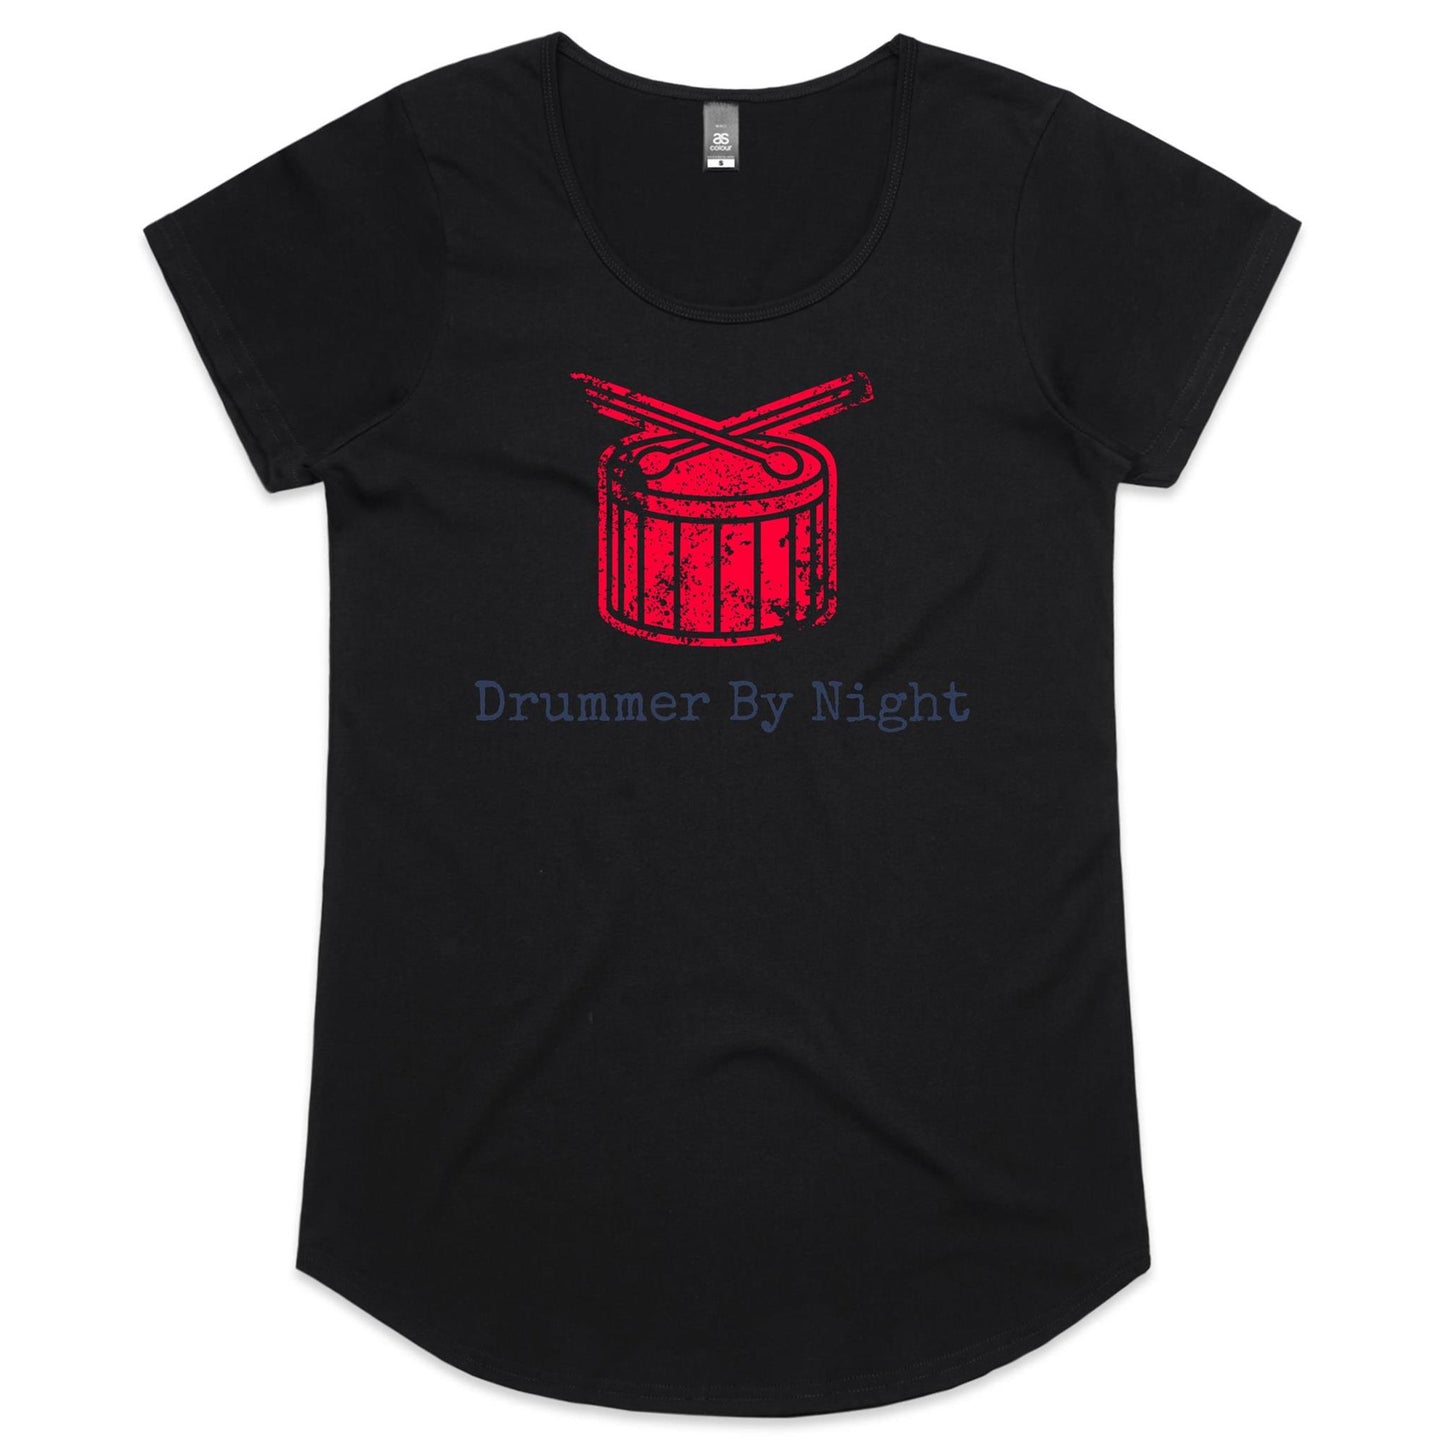 Drummer By Night - Womens Scoop Neck T-Shirt Black Womens Scoop Neck T-shirt Music